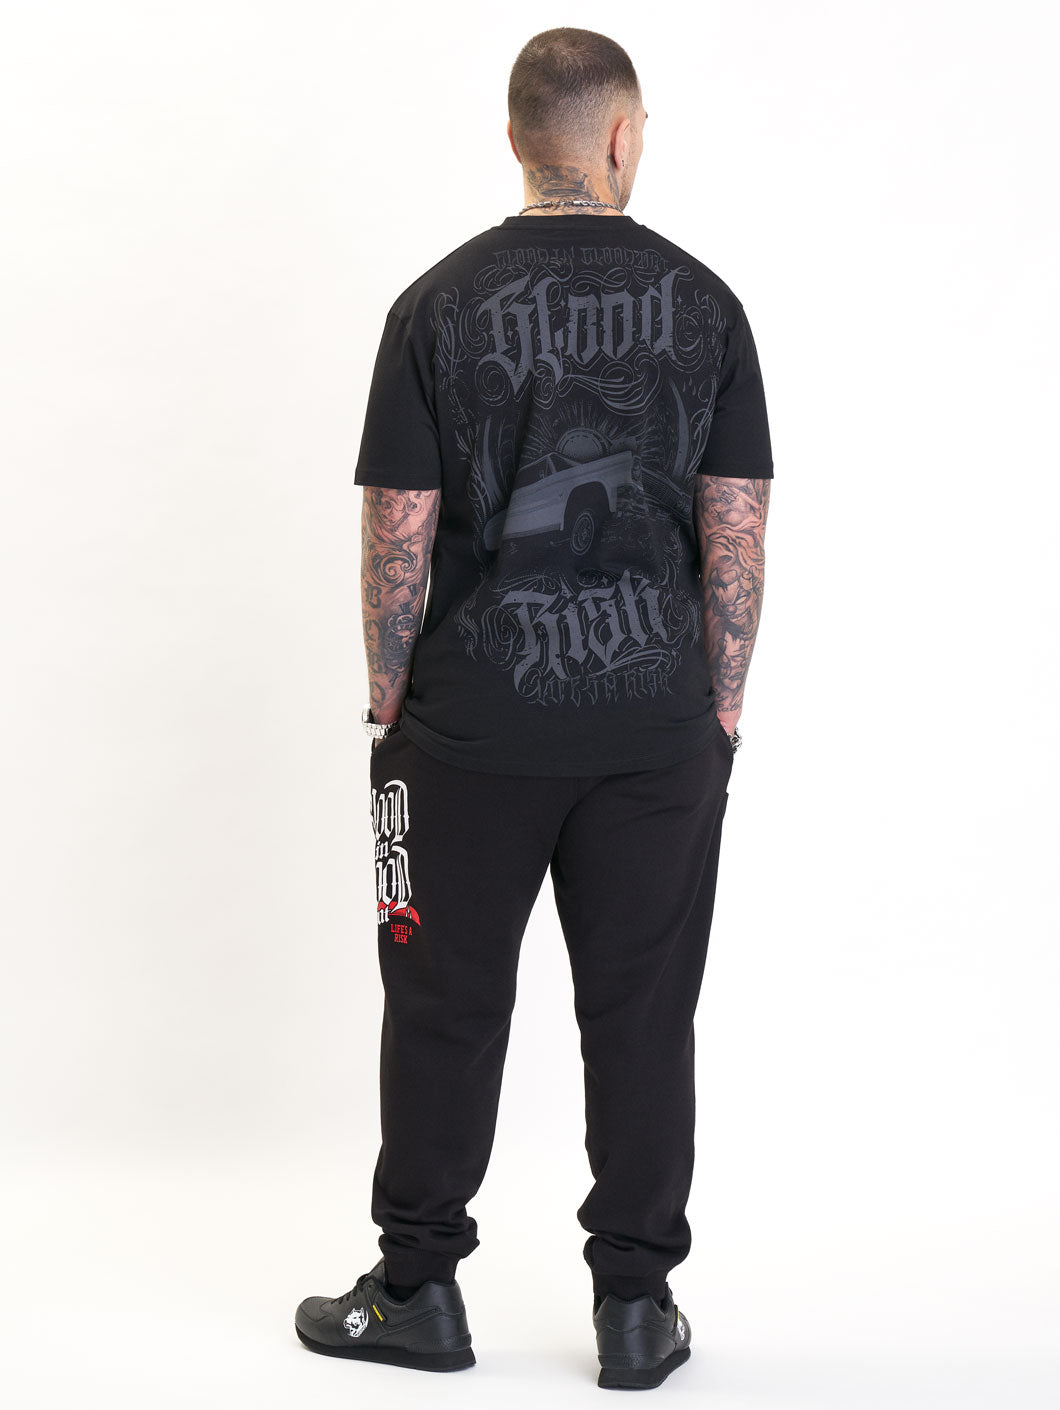 Blood In Blood Out Tavos T-Shirt - 3